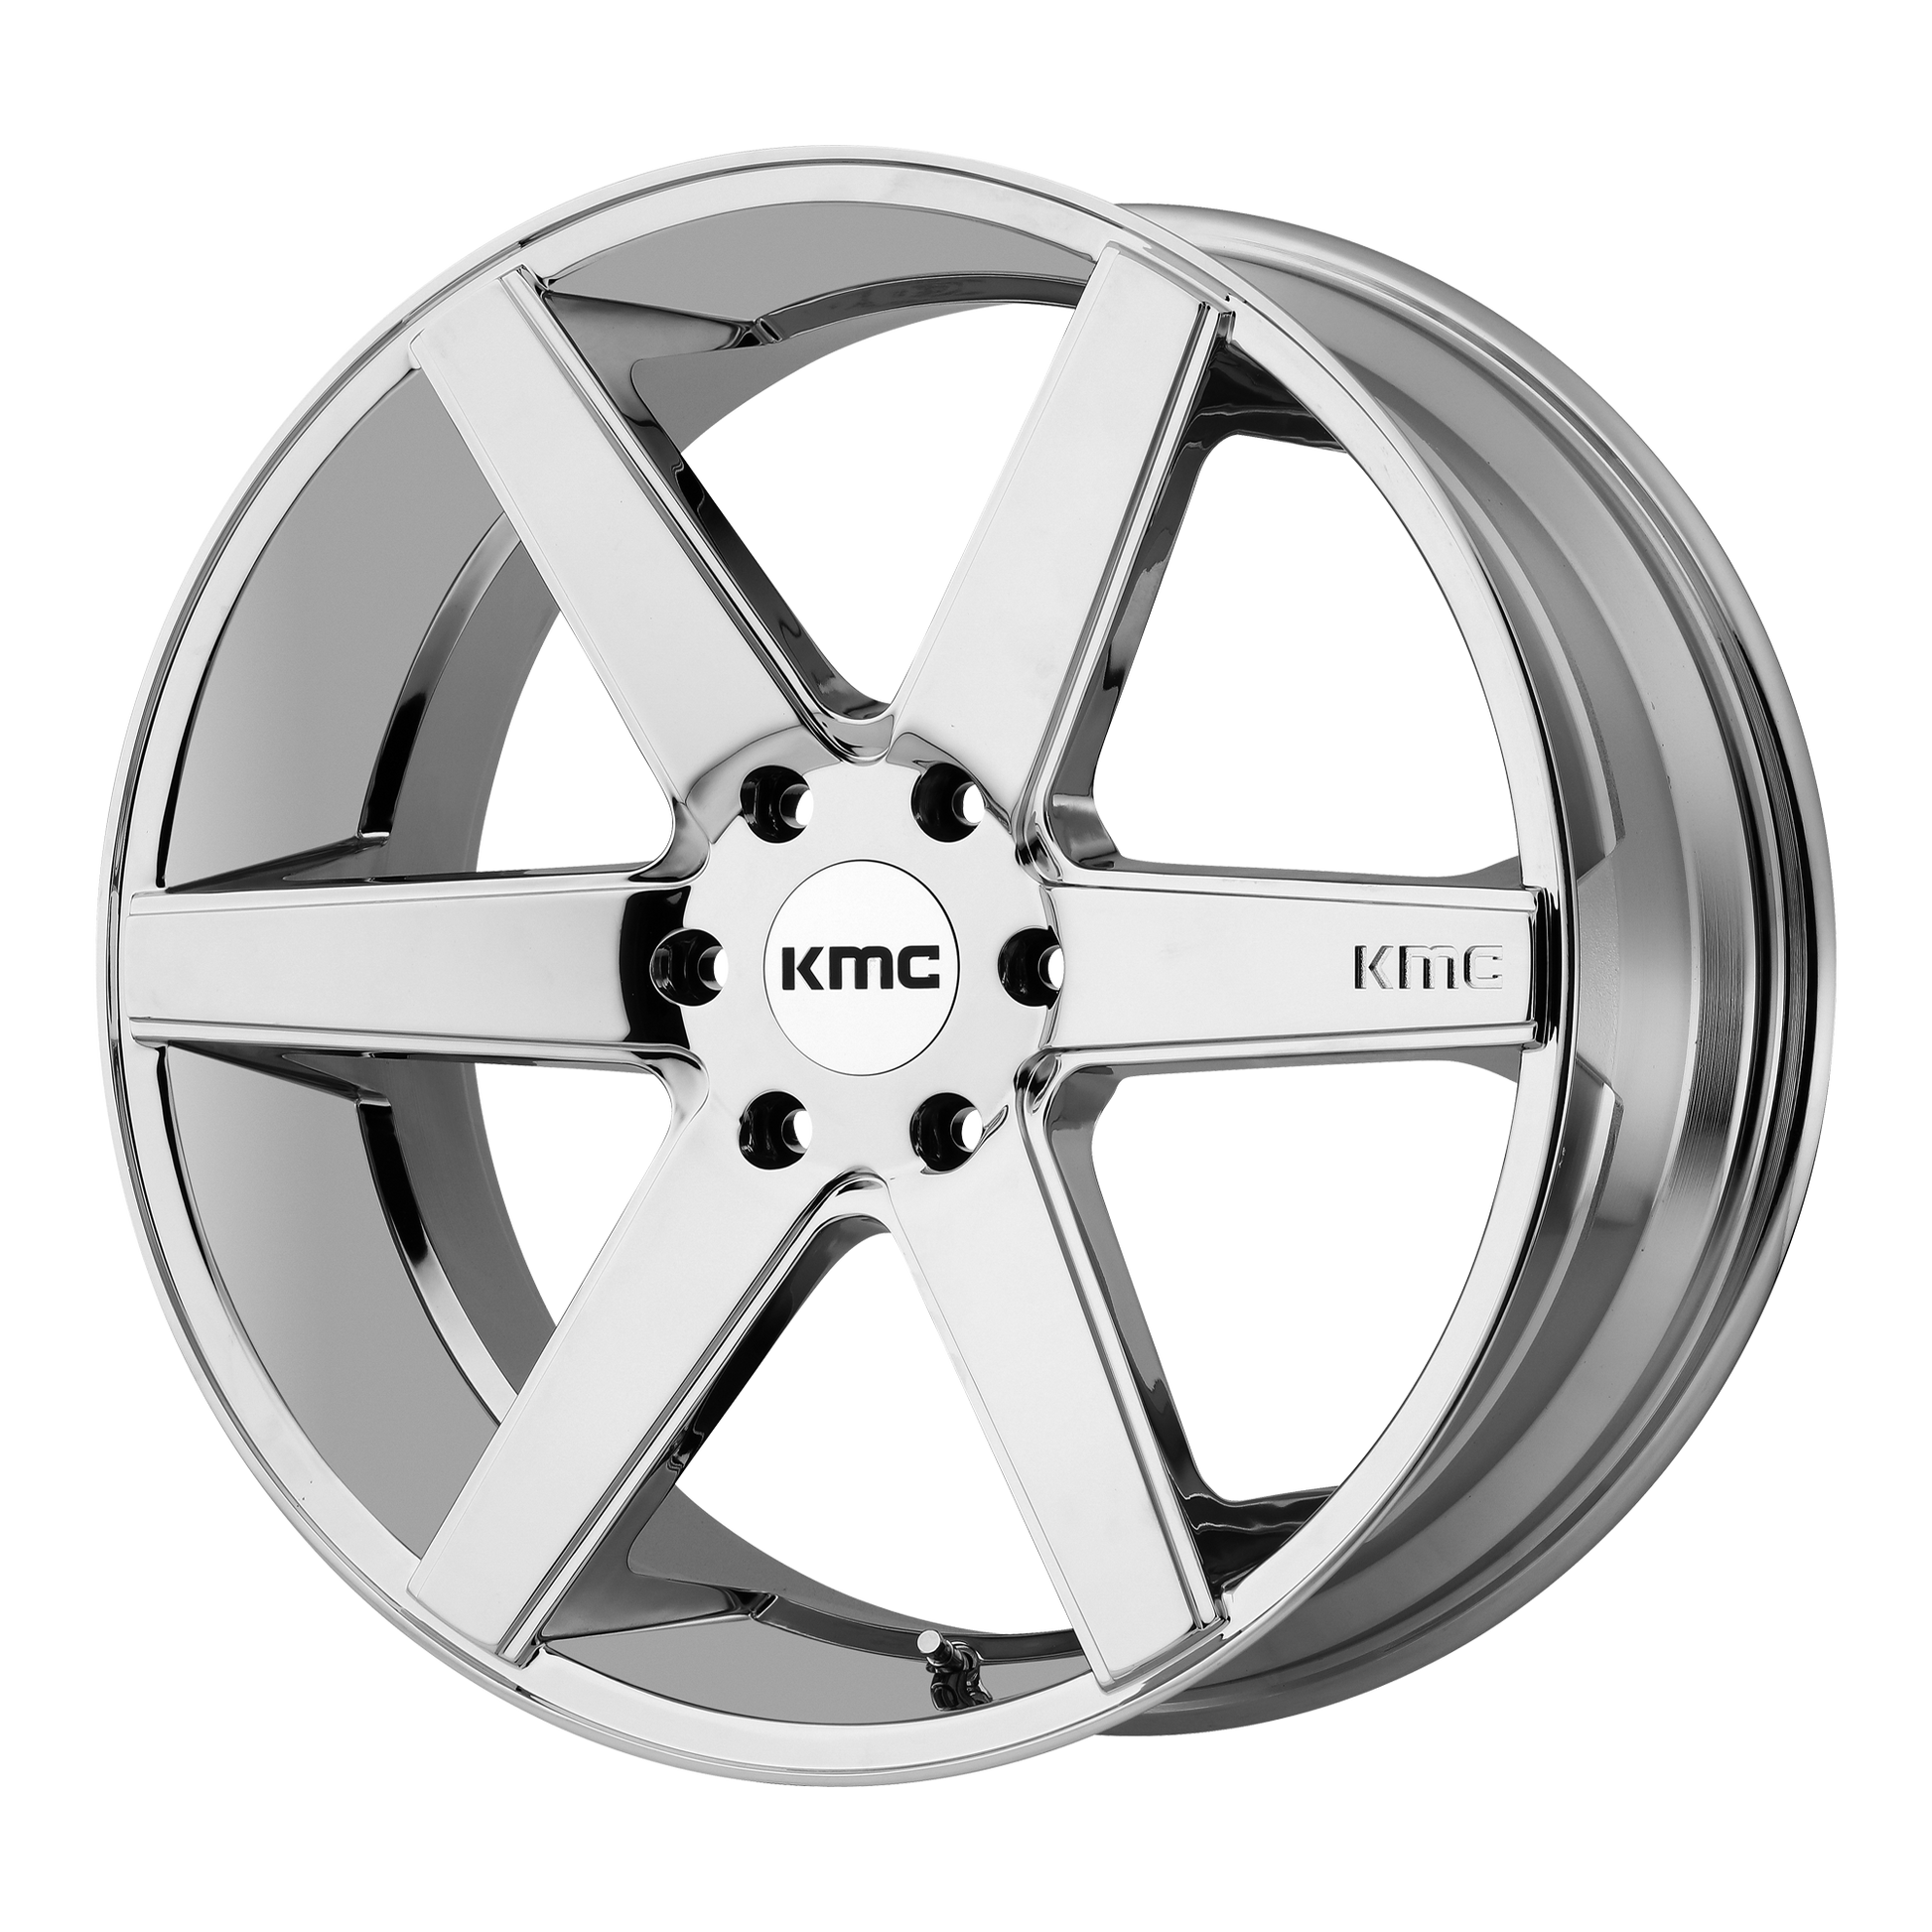 Kmc Km704 District Truck 20x8.5 20x8.5 45 Offset In Pvd